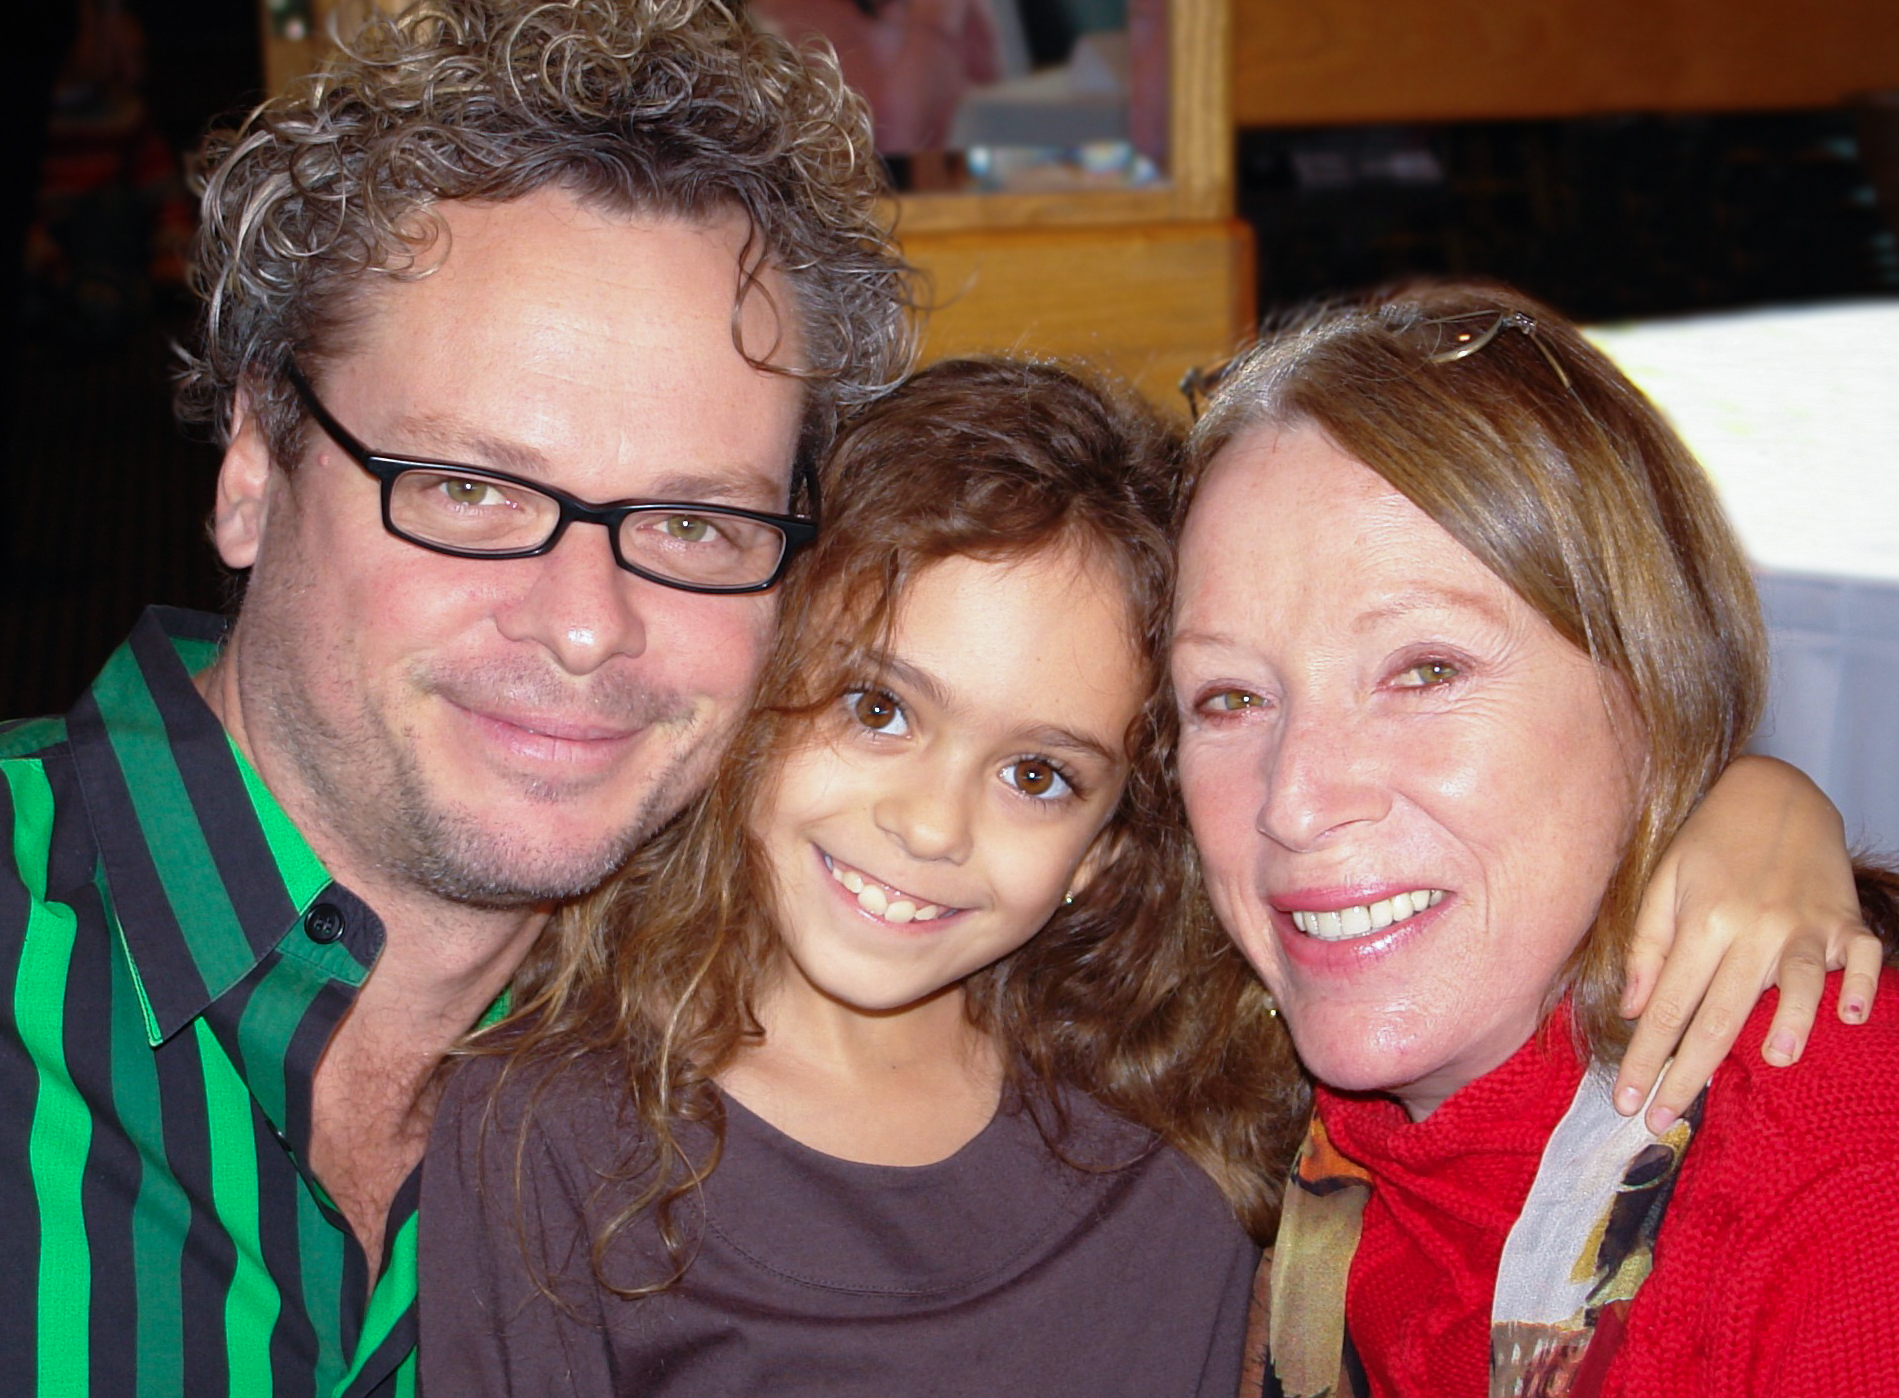 James Dunnison with his daughter and mother, Dr. Joyce Connolly